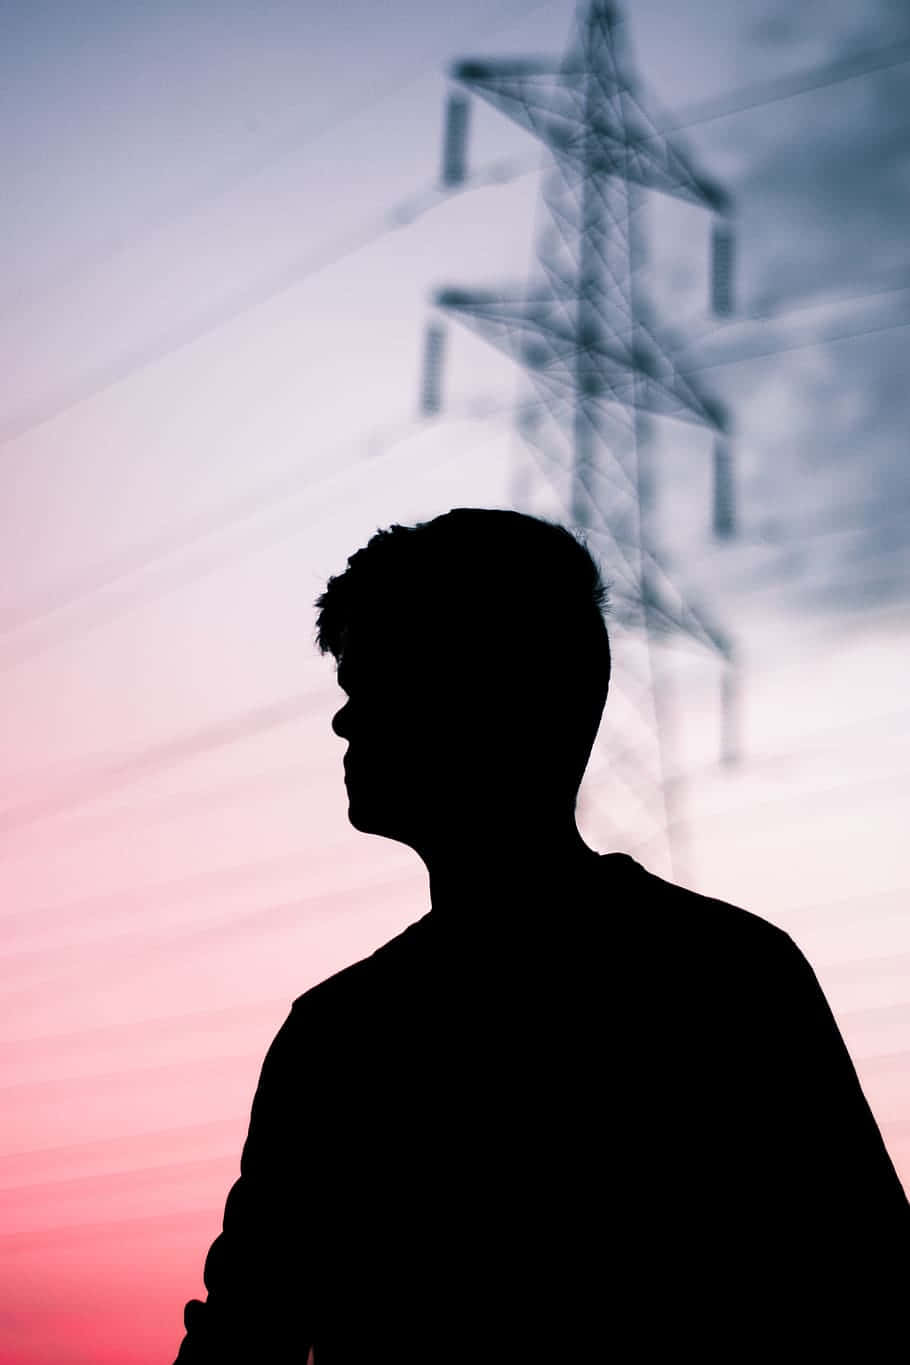 Random Person Silhouette And Transmission Tower Wallpaper